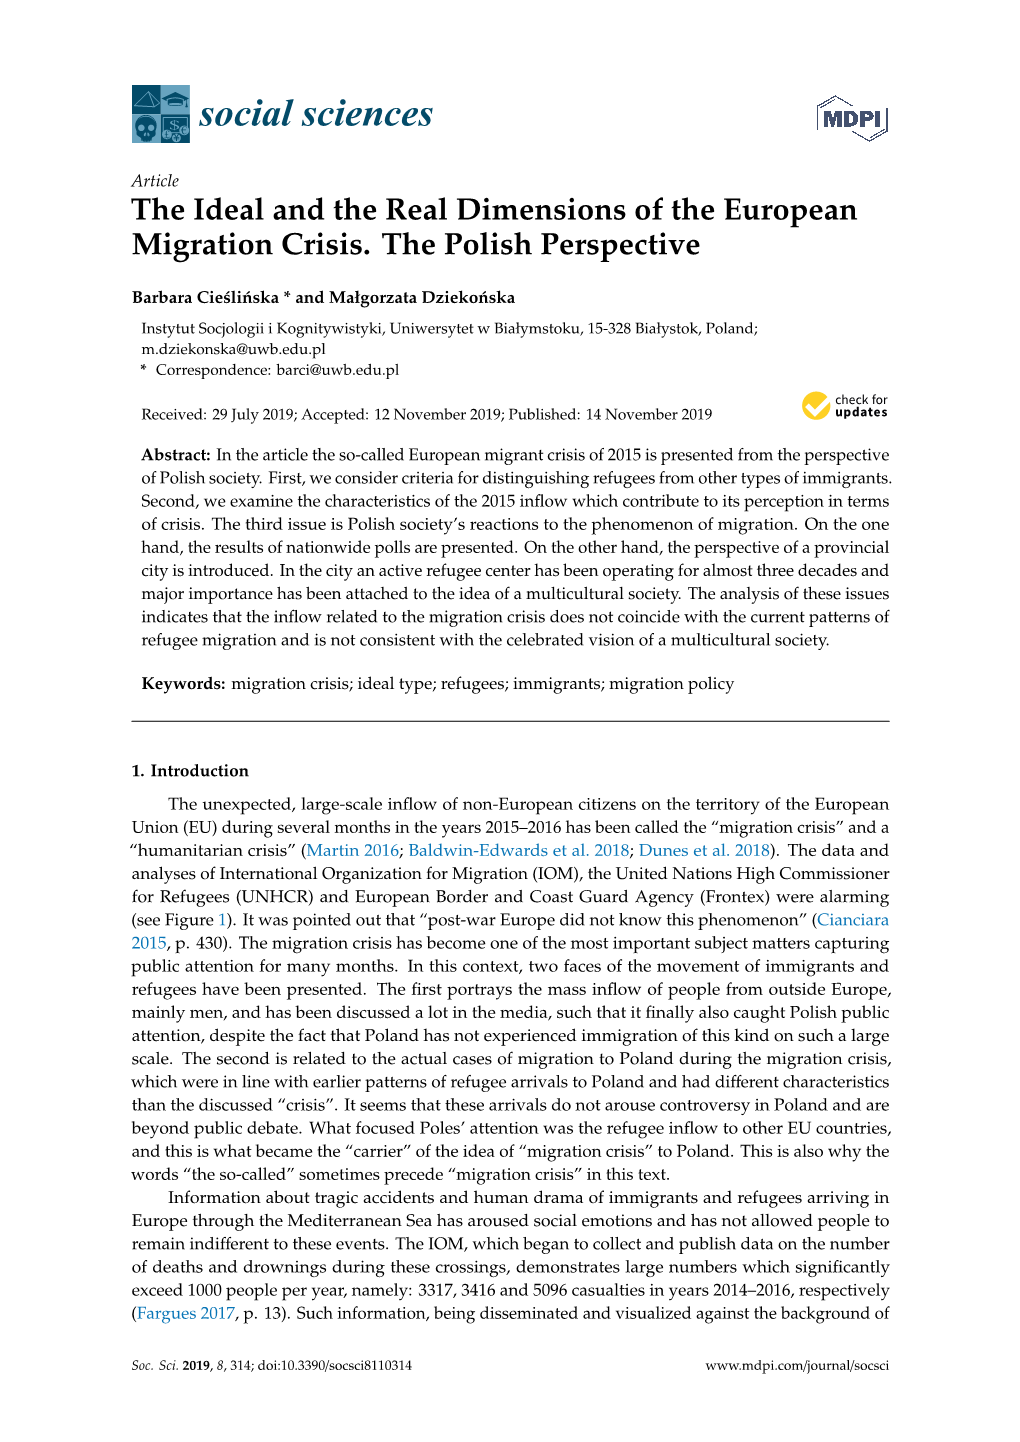 The Ideal and the Real Dimensions of the European Migration Crisis. the Polish Perspective